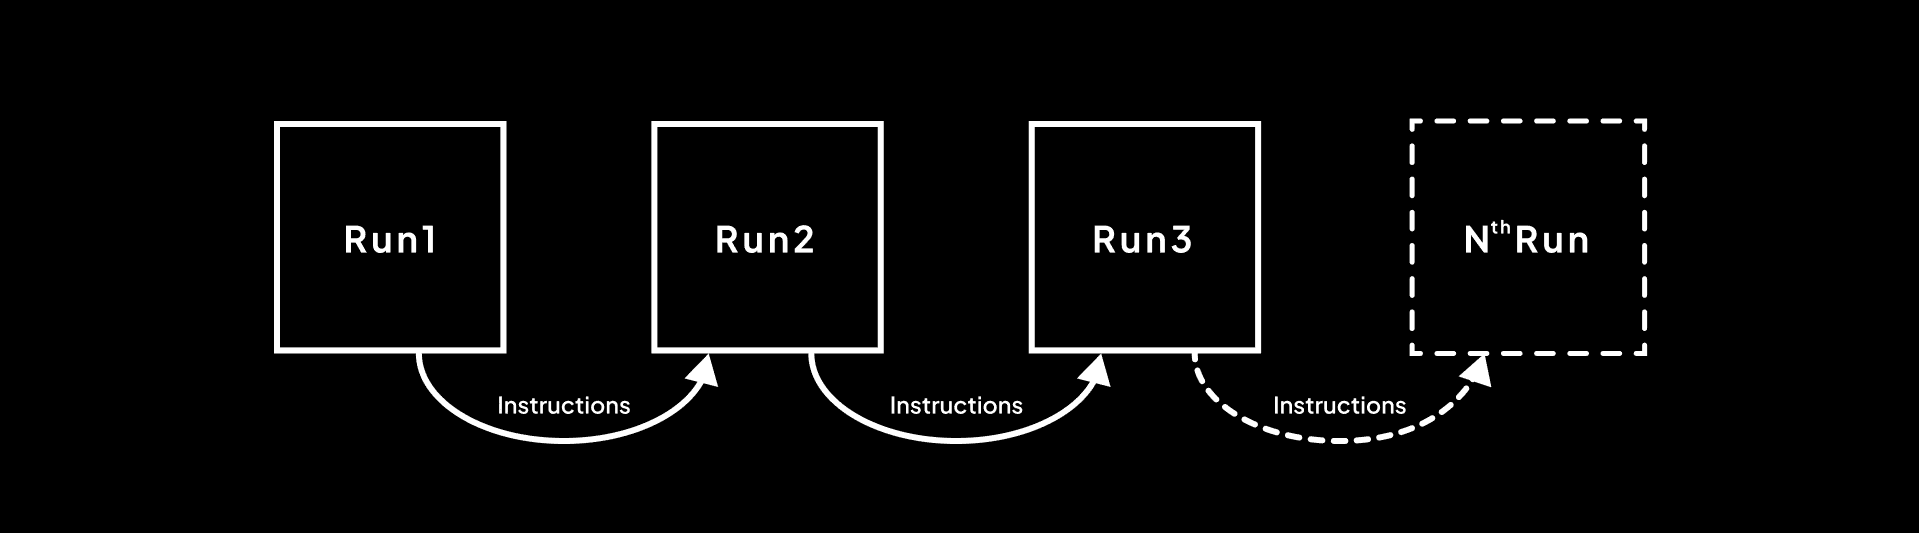 Multiple Runs with Instructions